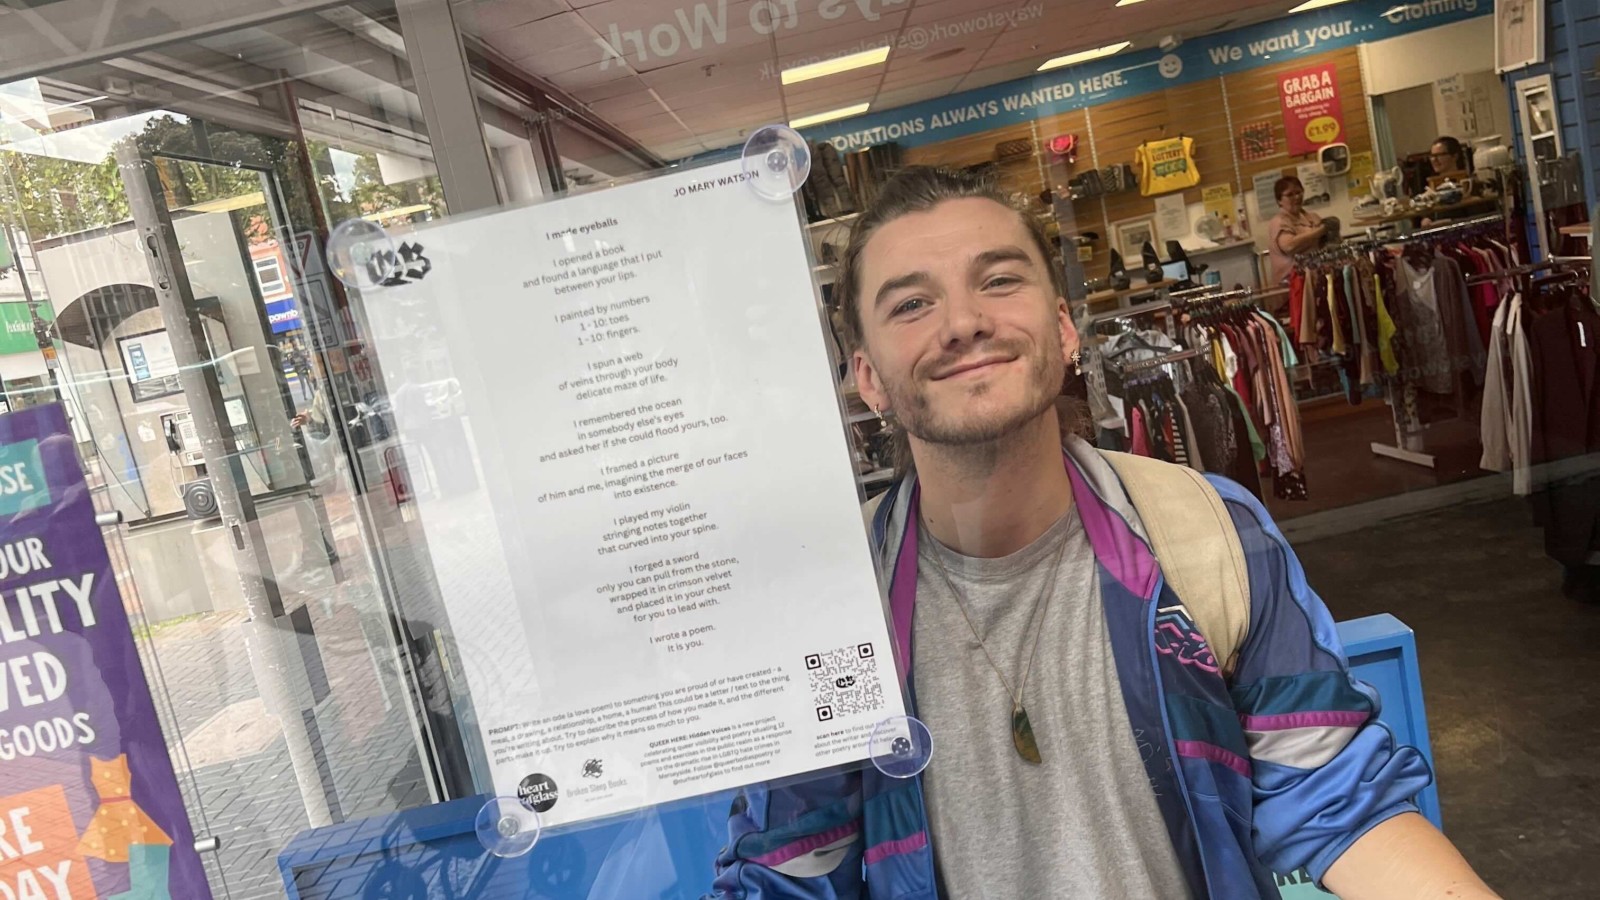 A poem in the window of a shop, with a long haired smiling person smiling through the glass